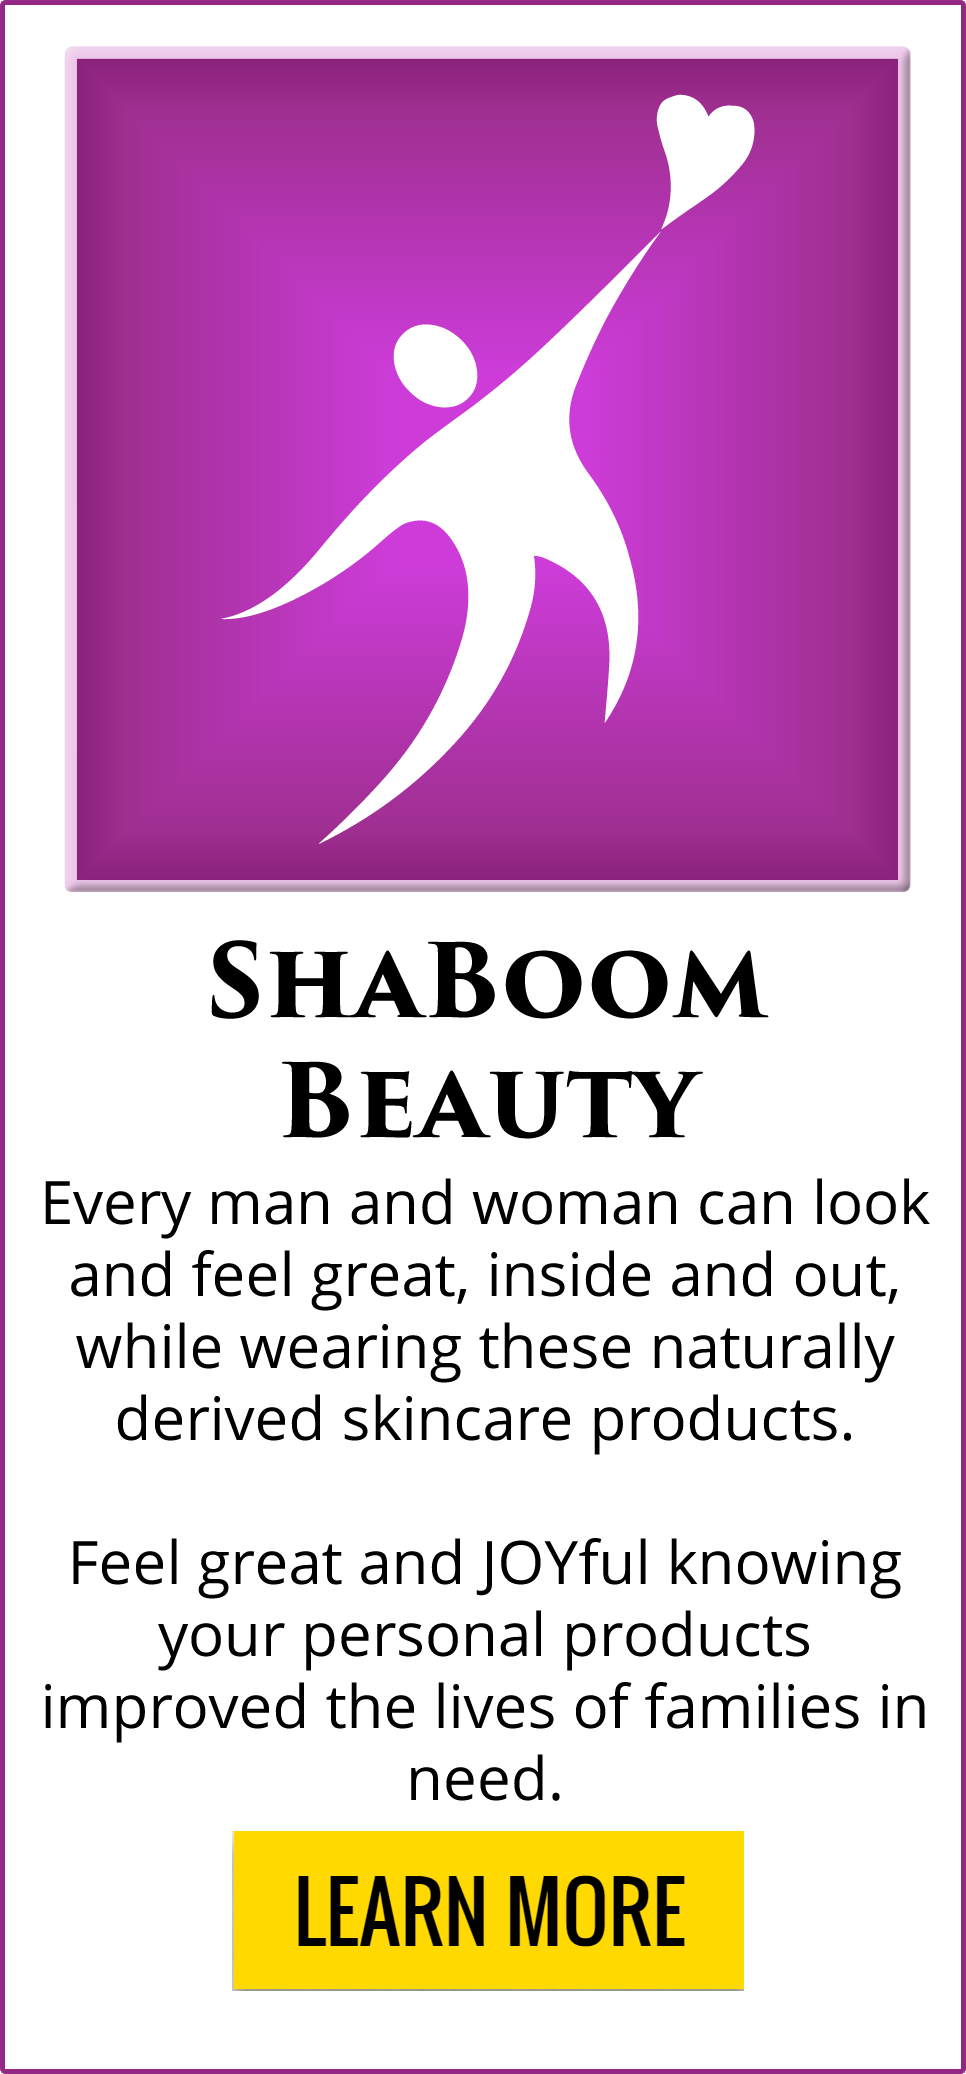 ShaBoom Beauty Products created to help OneMama and Fighting for the JOY of Others!